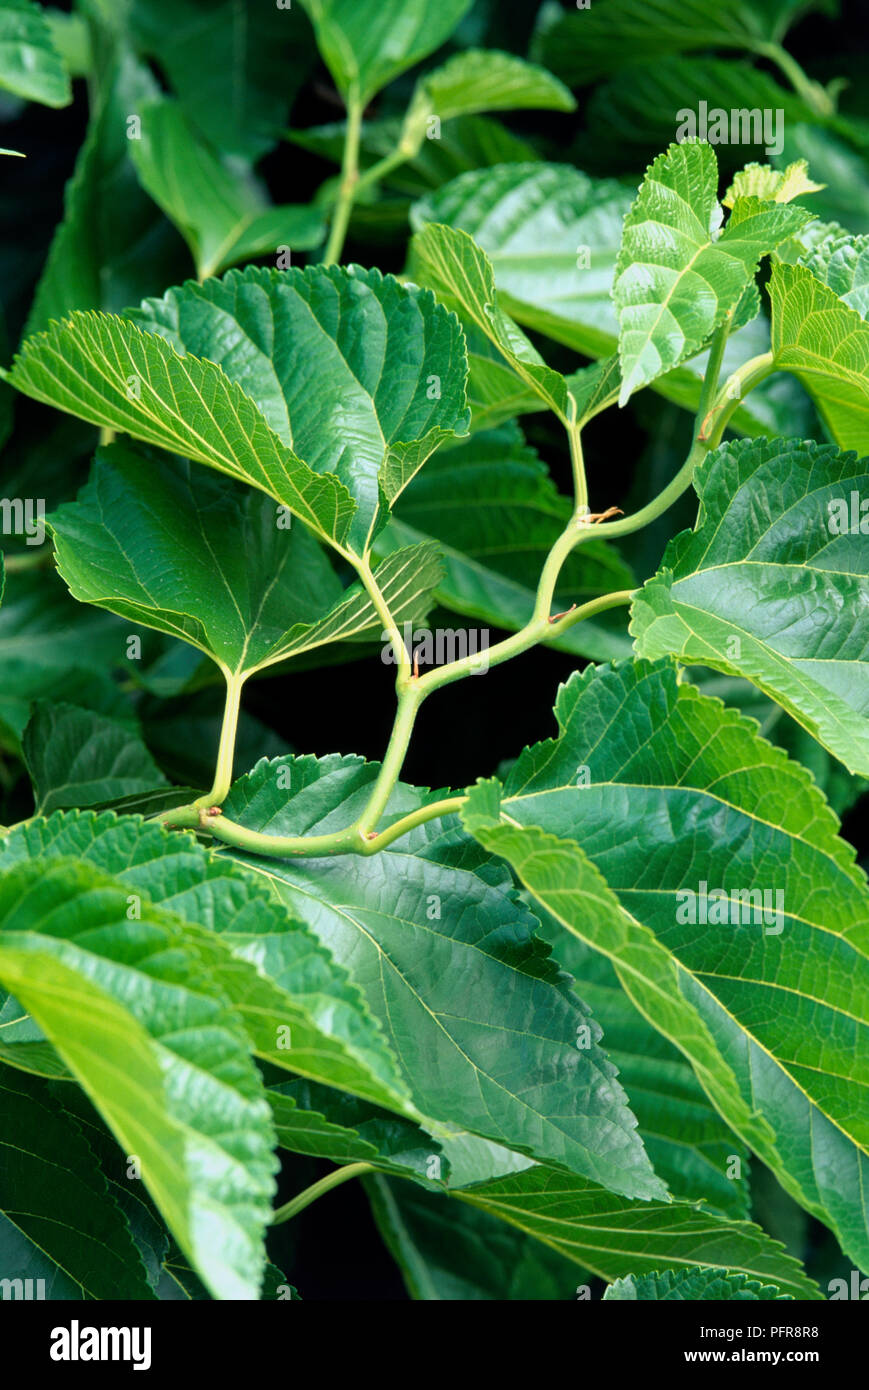 Morus australis (Unryu Mulberry), green leaves, close-up Stock Photo